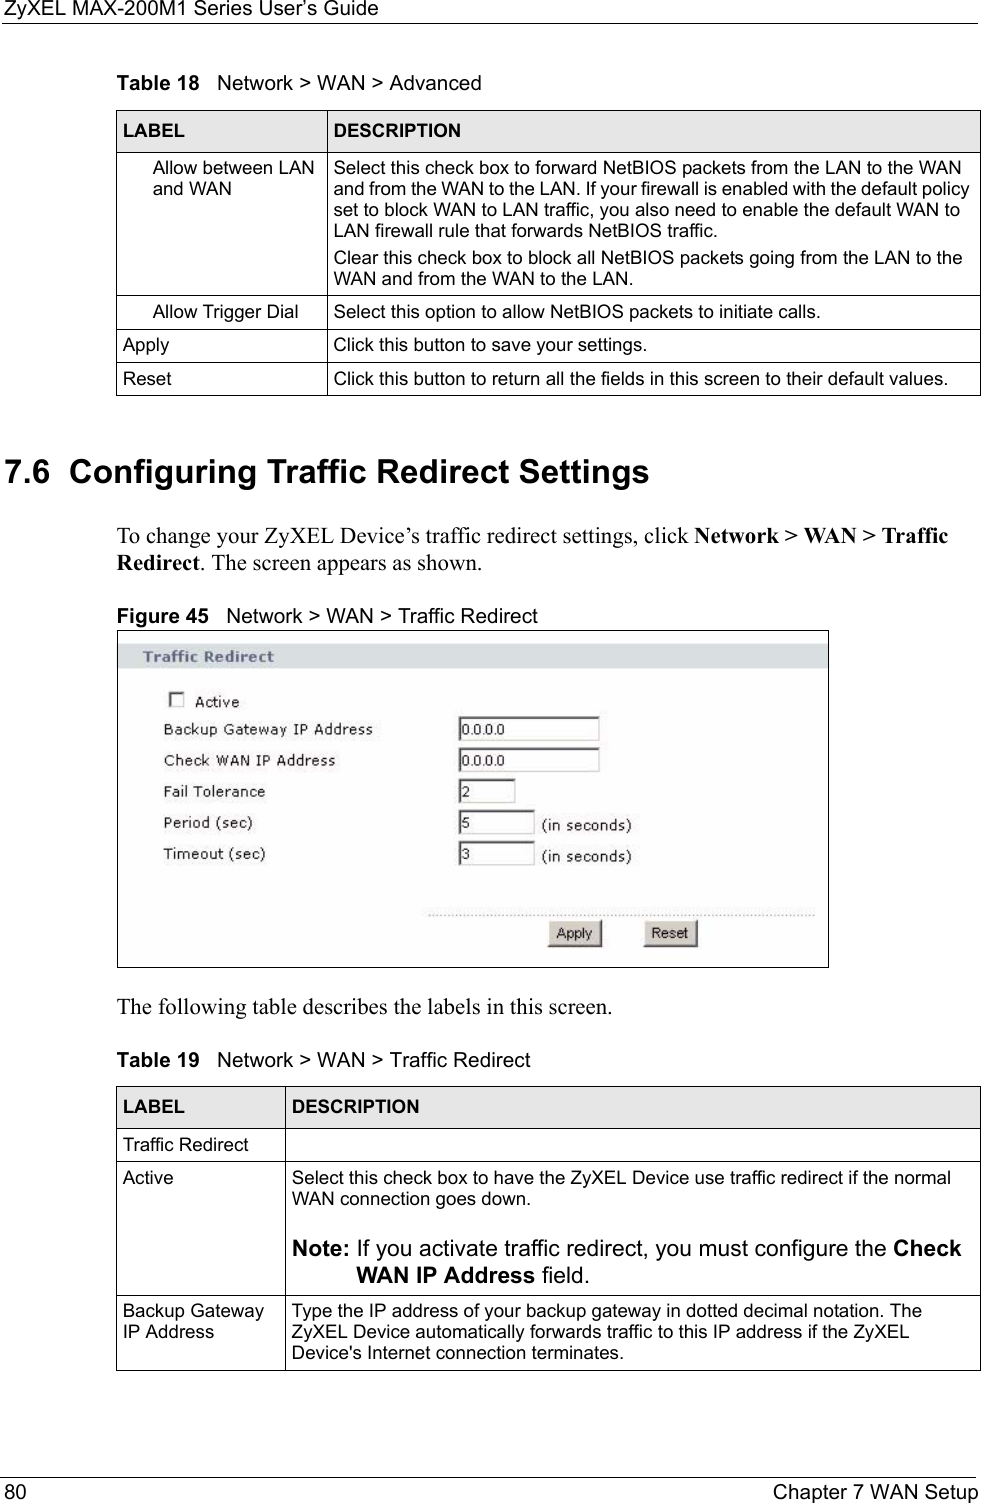 ZyXEL MAX-200M1 Series User’s Guide80 Chapter 7 WAN Setup7.6  Configuring Traffic Redirect SettingsTo change your ZyXEL Device’s traffic redirect settings, click Network &gt; WAN &gt; Traffic Redirect. The screen appears as shown.Figure 45   Network &gt; WAN &gt; Traffic RedirectThe following table describes the labels in this screen.Allow between LAN and WANSelect this check box to forward NetBIOS packets from the LAN to the WAN and from the WAN to the LAN. If your firewall is enabled with the default policy set to block WAN to LAN traffic, you also need to enable the default WAN to LAN firewall rule that forwards NetBIOS traffic.Clear this check box to block all NetBIOS packets going from the LAN to the WAN and from the WAN to the LAN.Allow Trigger Dial Select this option to allow NetBIOS packets to initiate calls.Apply Click this button to save your settings.Reset Click this button to return all the fields in this screen to their default values.Table 18   Network &gt; WAN &gt; AdvancedLABEL DESCRIPTIONTable 19   Network &gt; WAN &gt; Traffic RedirectLABEL DESCRIPTIONTraffic RedirectActive Select this check box to have the ZyXEL Device use traffic redirect if the normal WAN connection goes down.Note: If you activate traffic redirect, you must configure the Check WAN IP Address field.Backup Gateway IP AddressType the IP address of your backup gateway in dotted decimal notation. The ZyXEL Device automatically forwards traffic to this IP address if the ZyXEL Device&apos;s Internet connection terminates. 